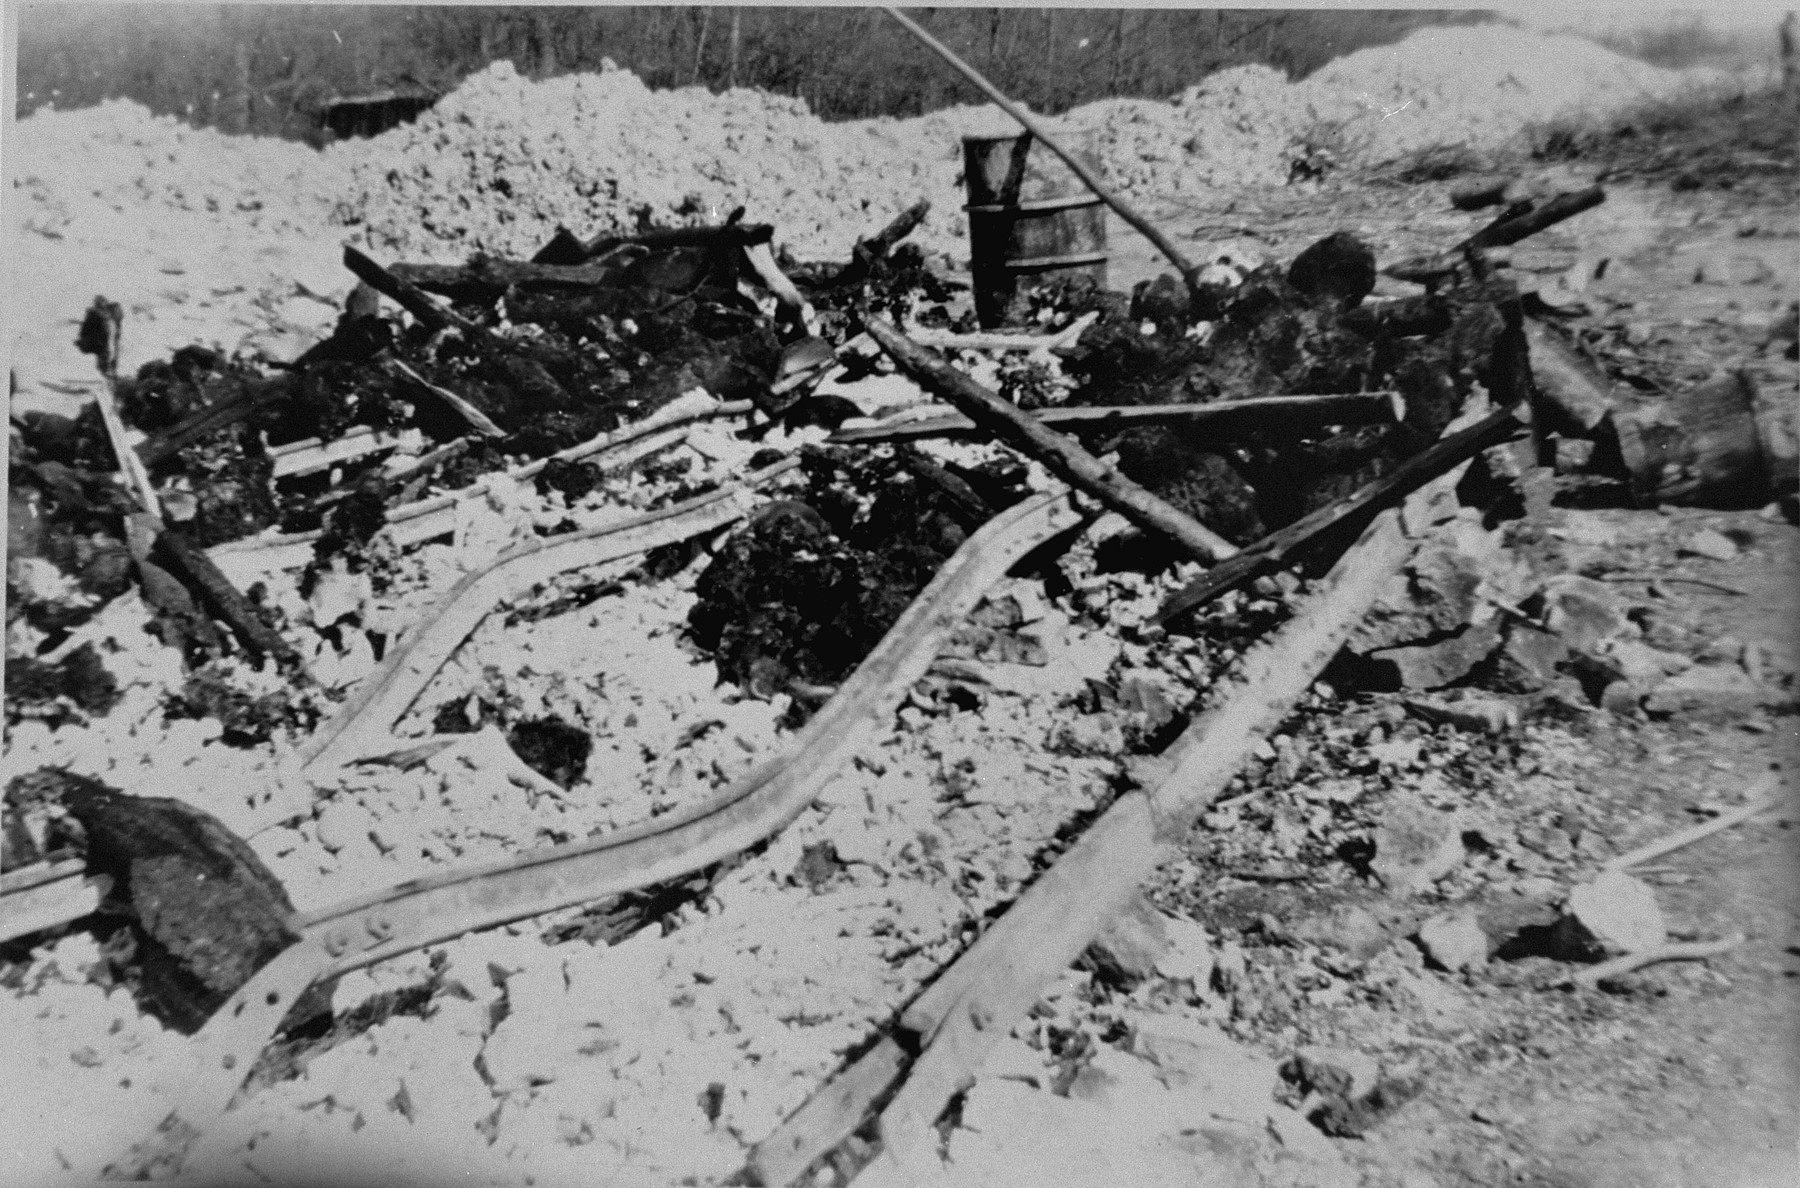 The charred remains of prisoners' corpses burned by the SS prior to the evacuation of the Ohrdruf concentration camp.